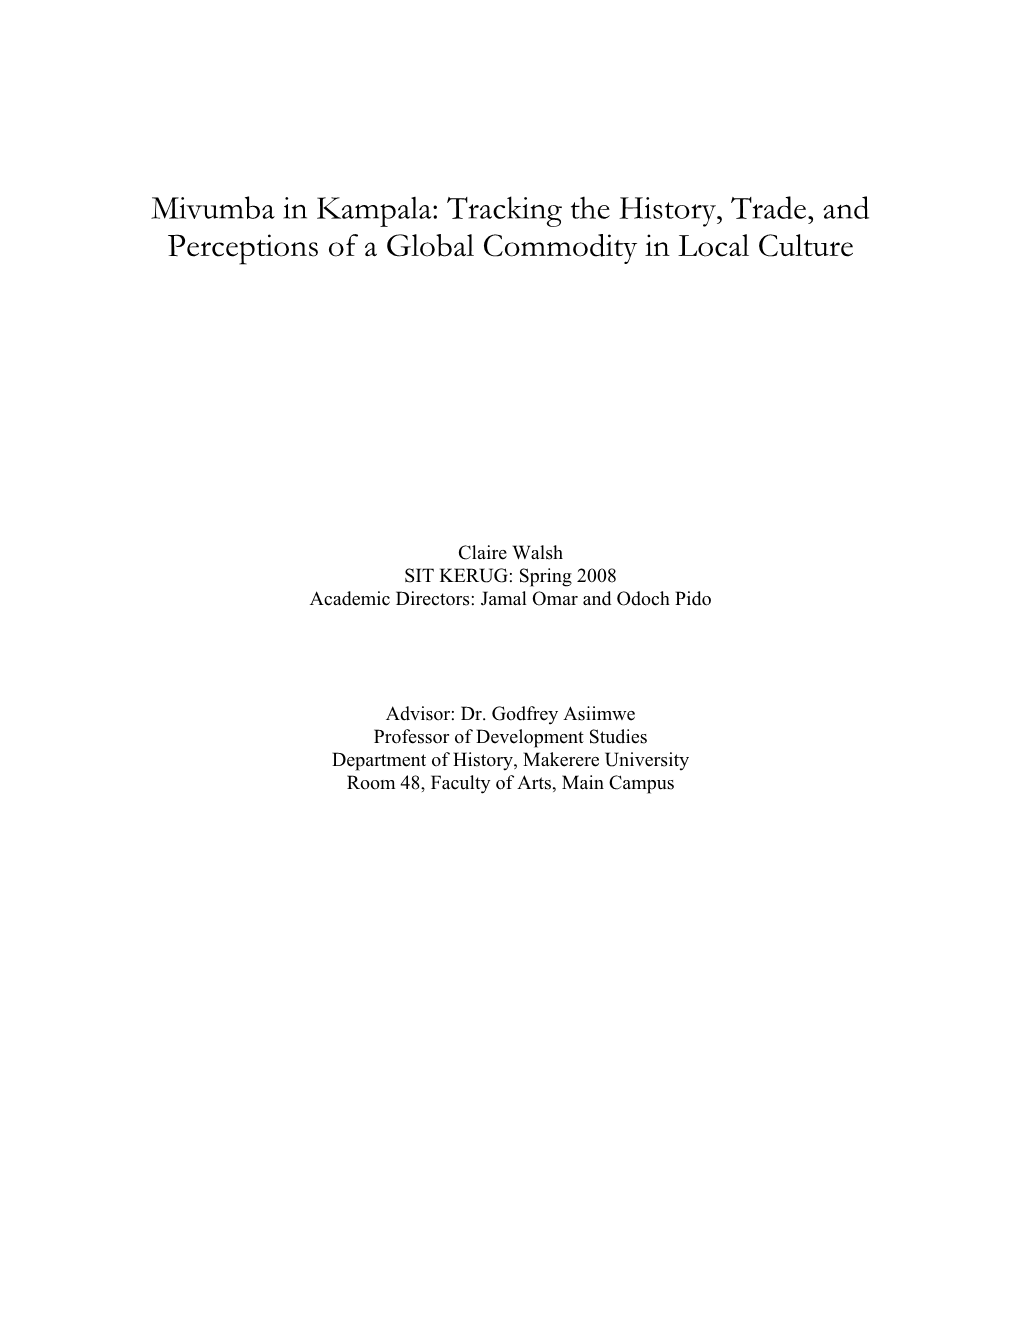 Mivumba in Kampala: Tracking the History, Trade, and Perceptions of a Global Commodity in Local Culture